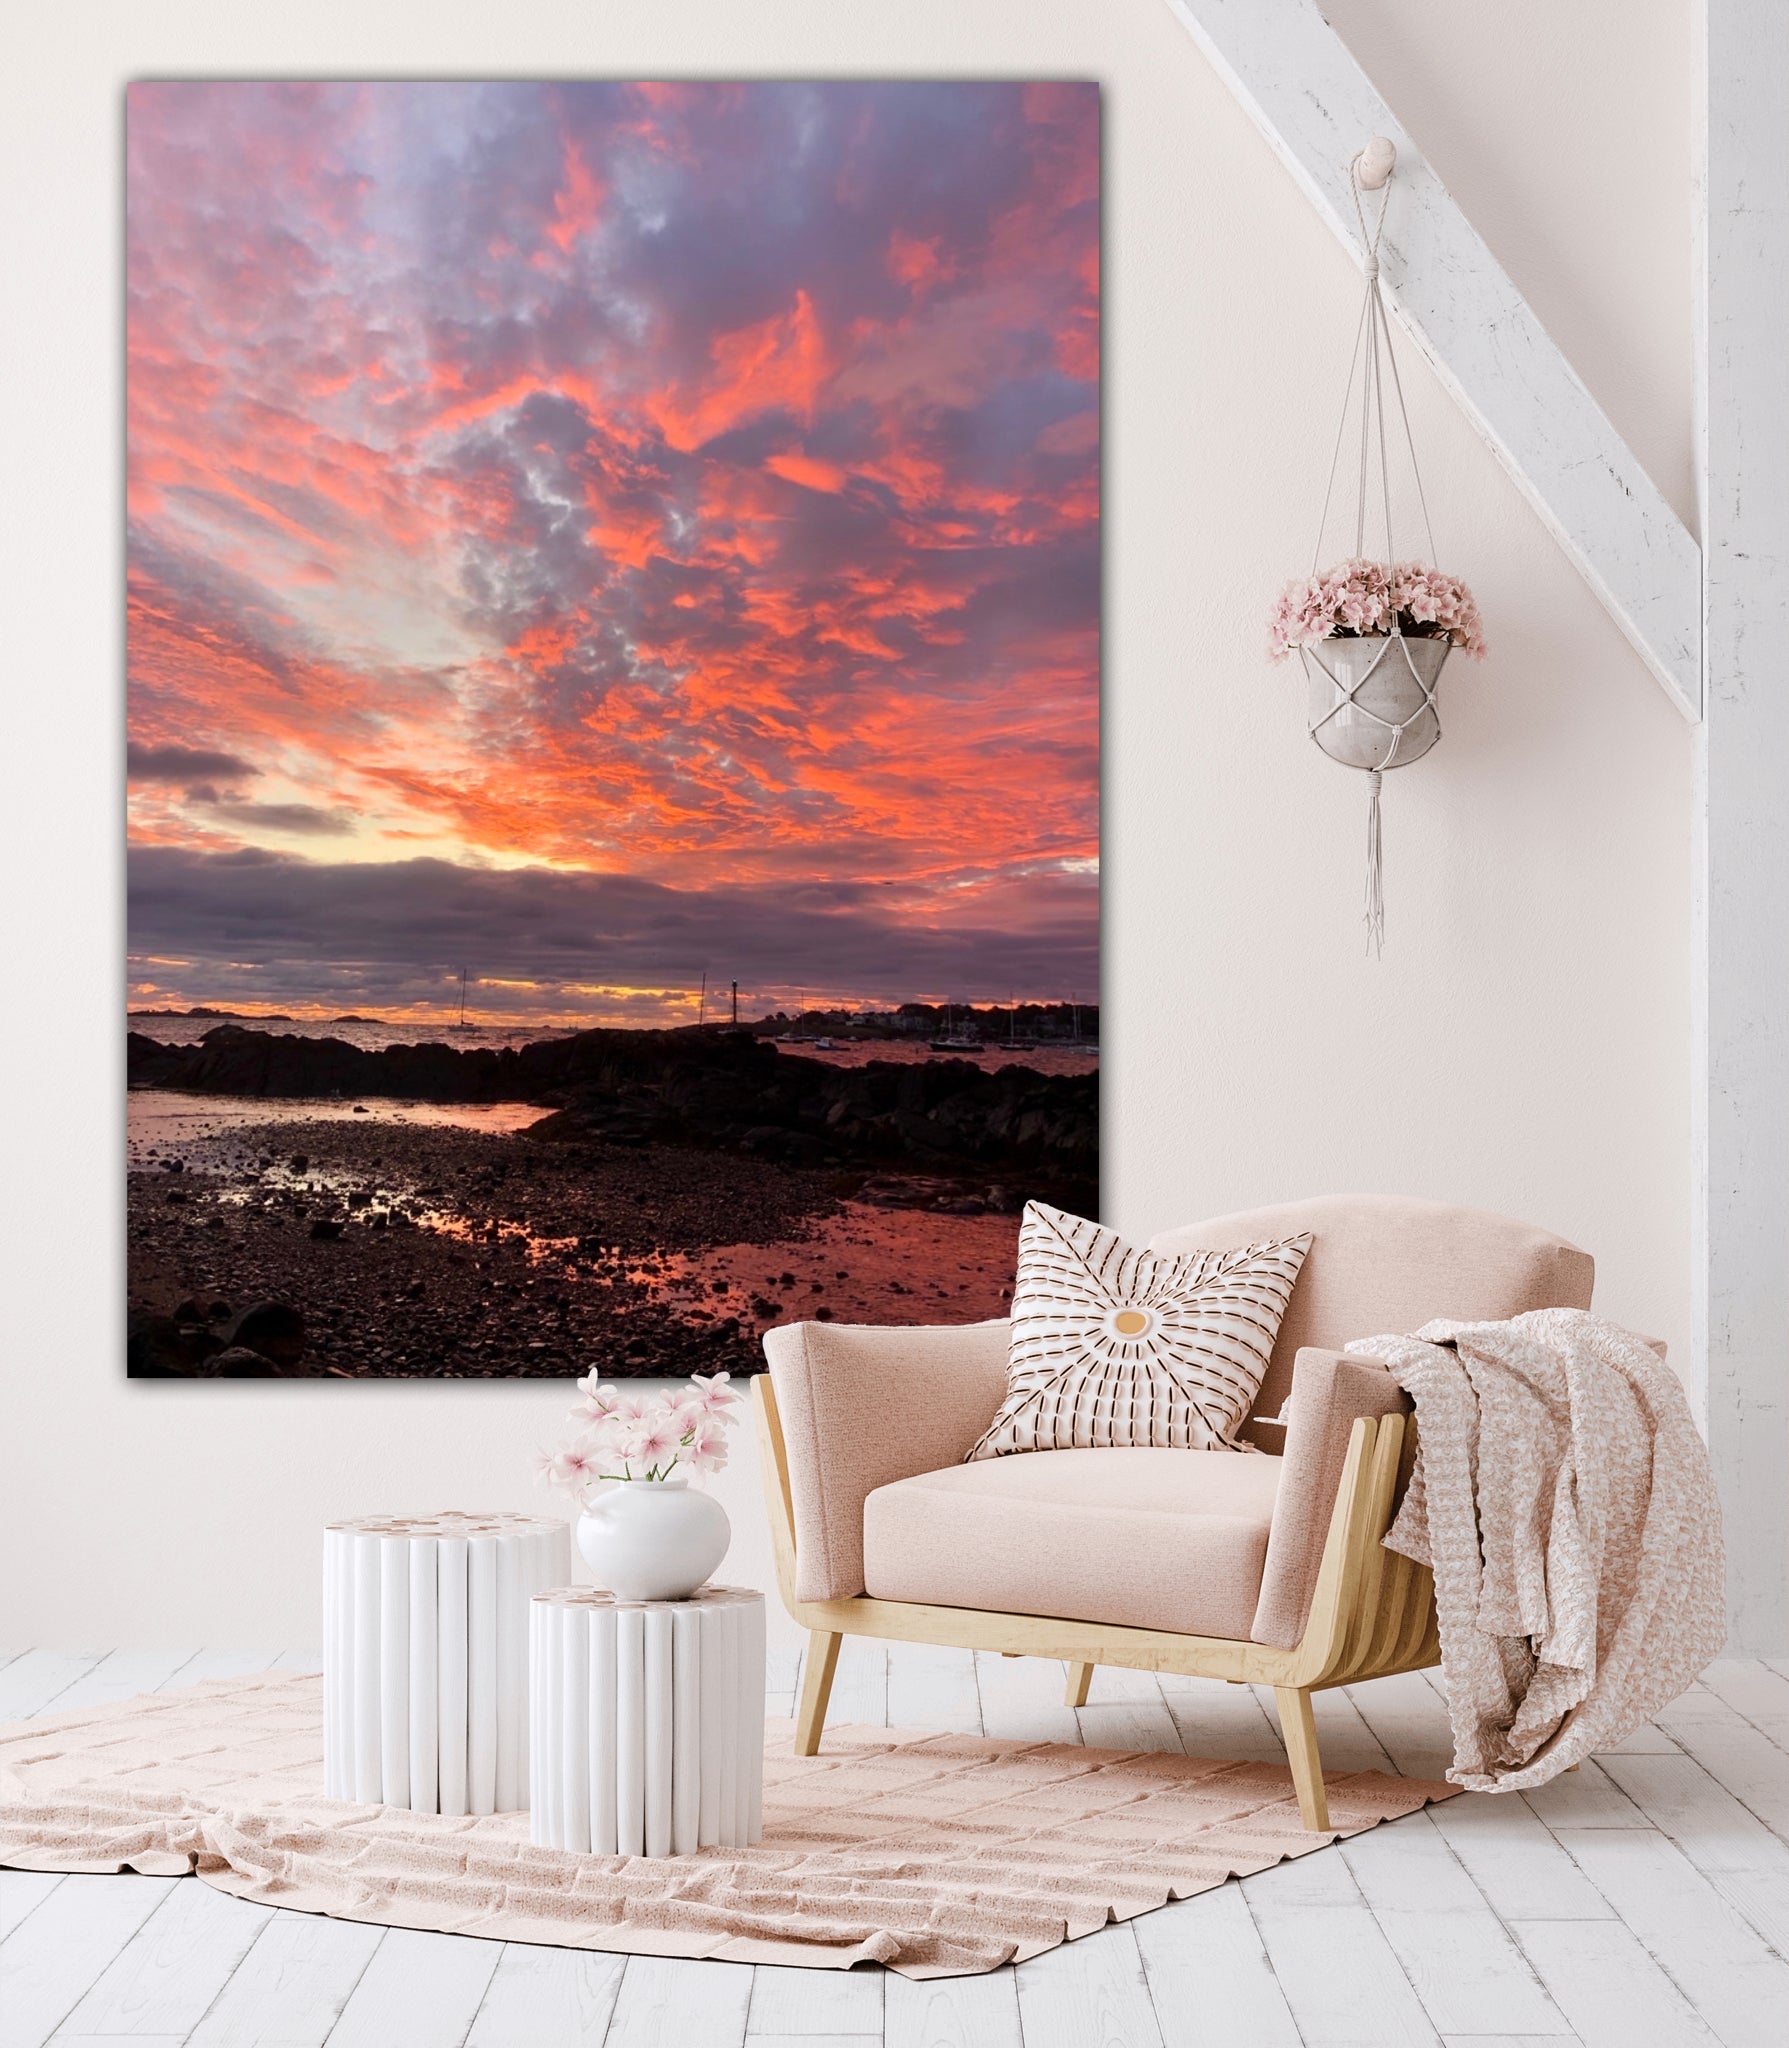 red skys over marblehead print home decor by Jacqueline mb designs 